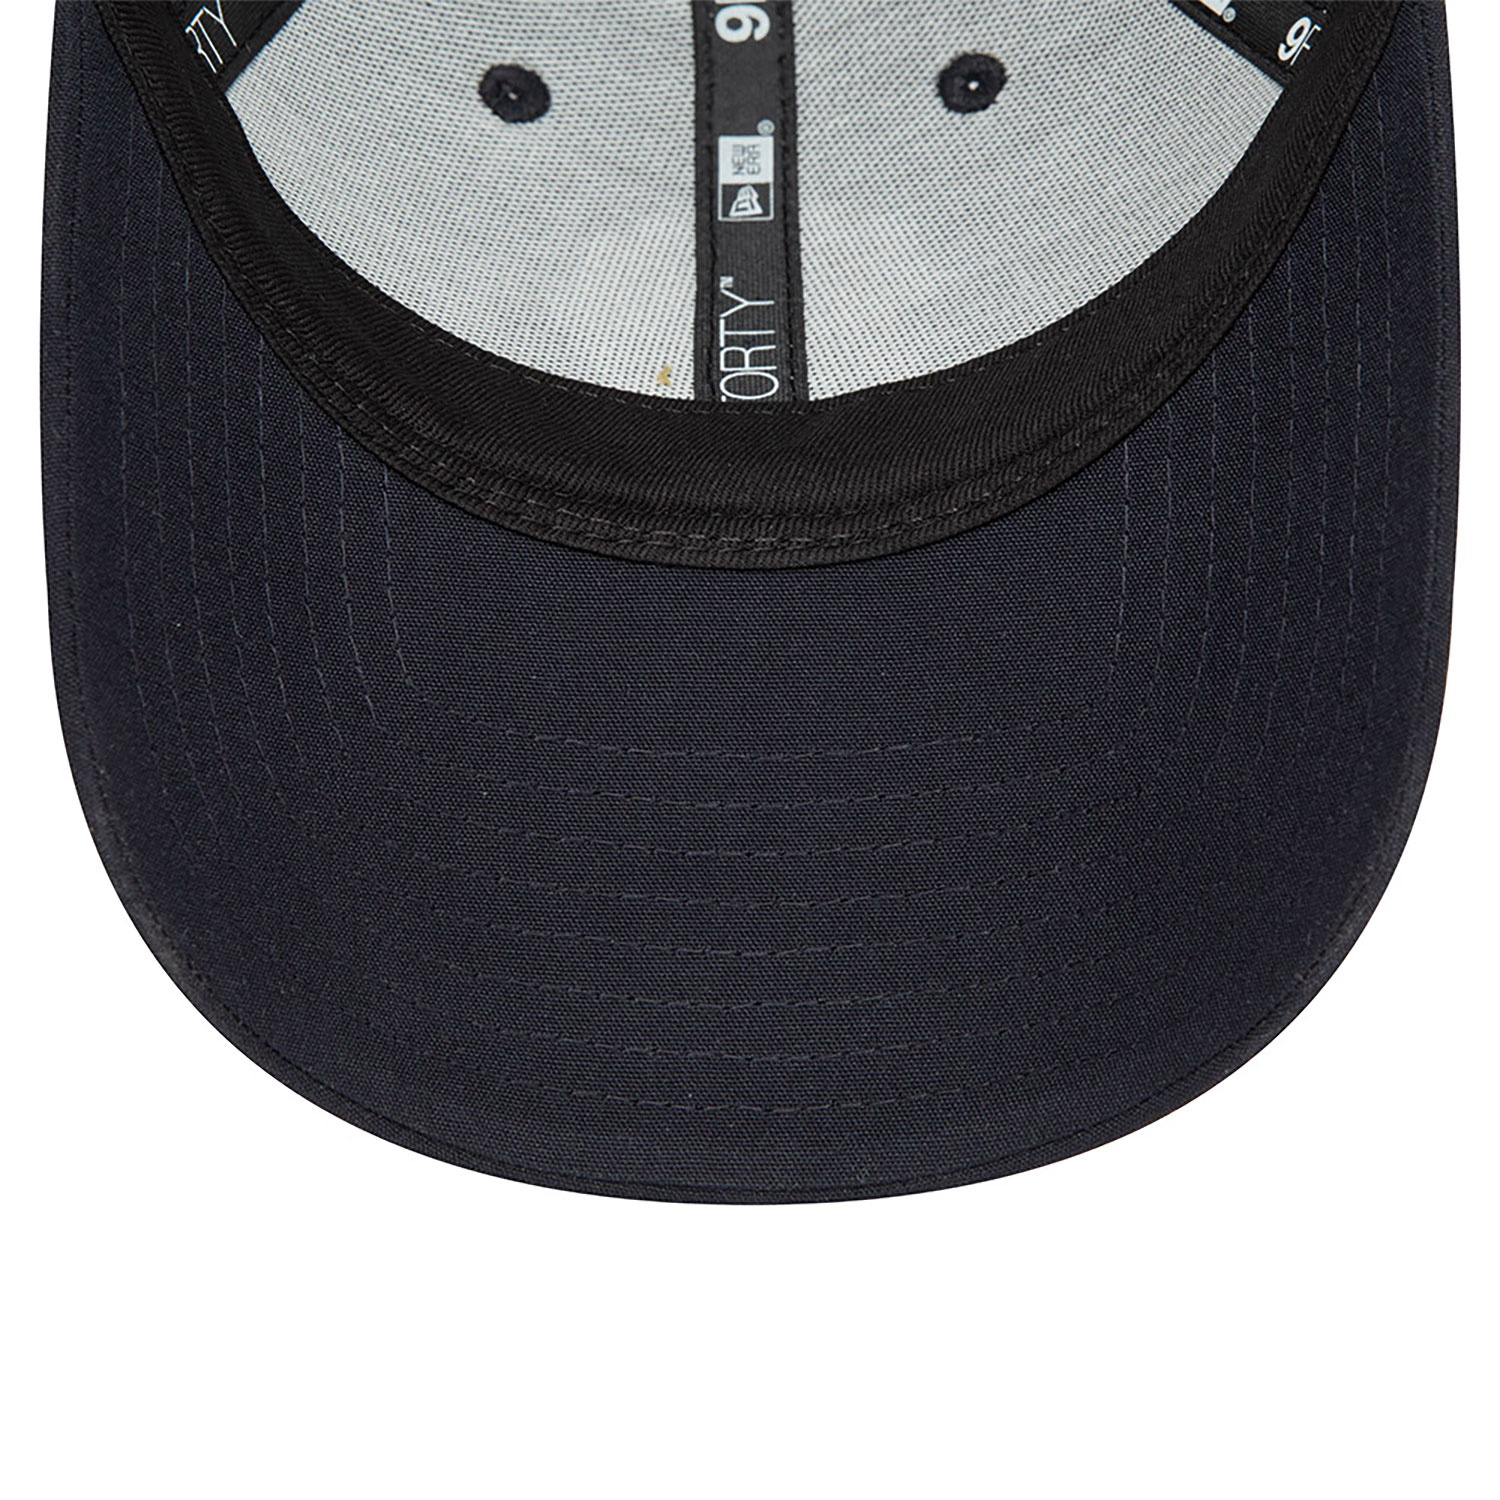 Rugby Football Union Repreve Navy 9FORTY Adjustable Cap